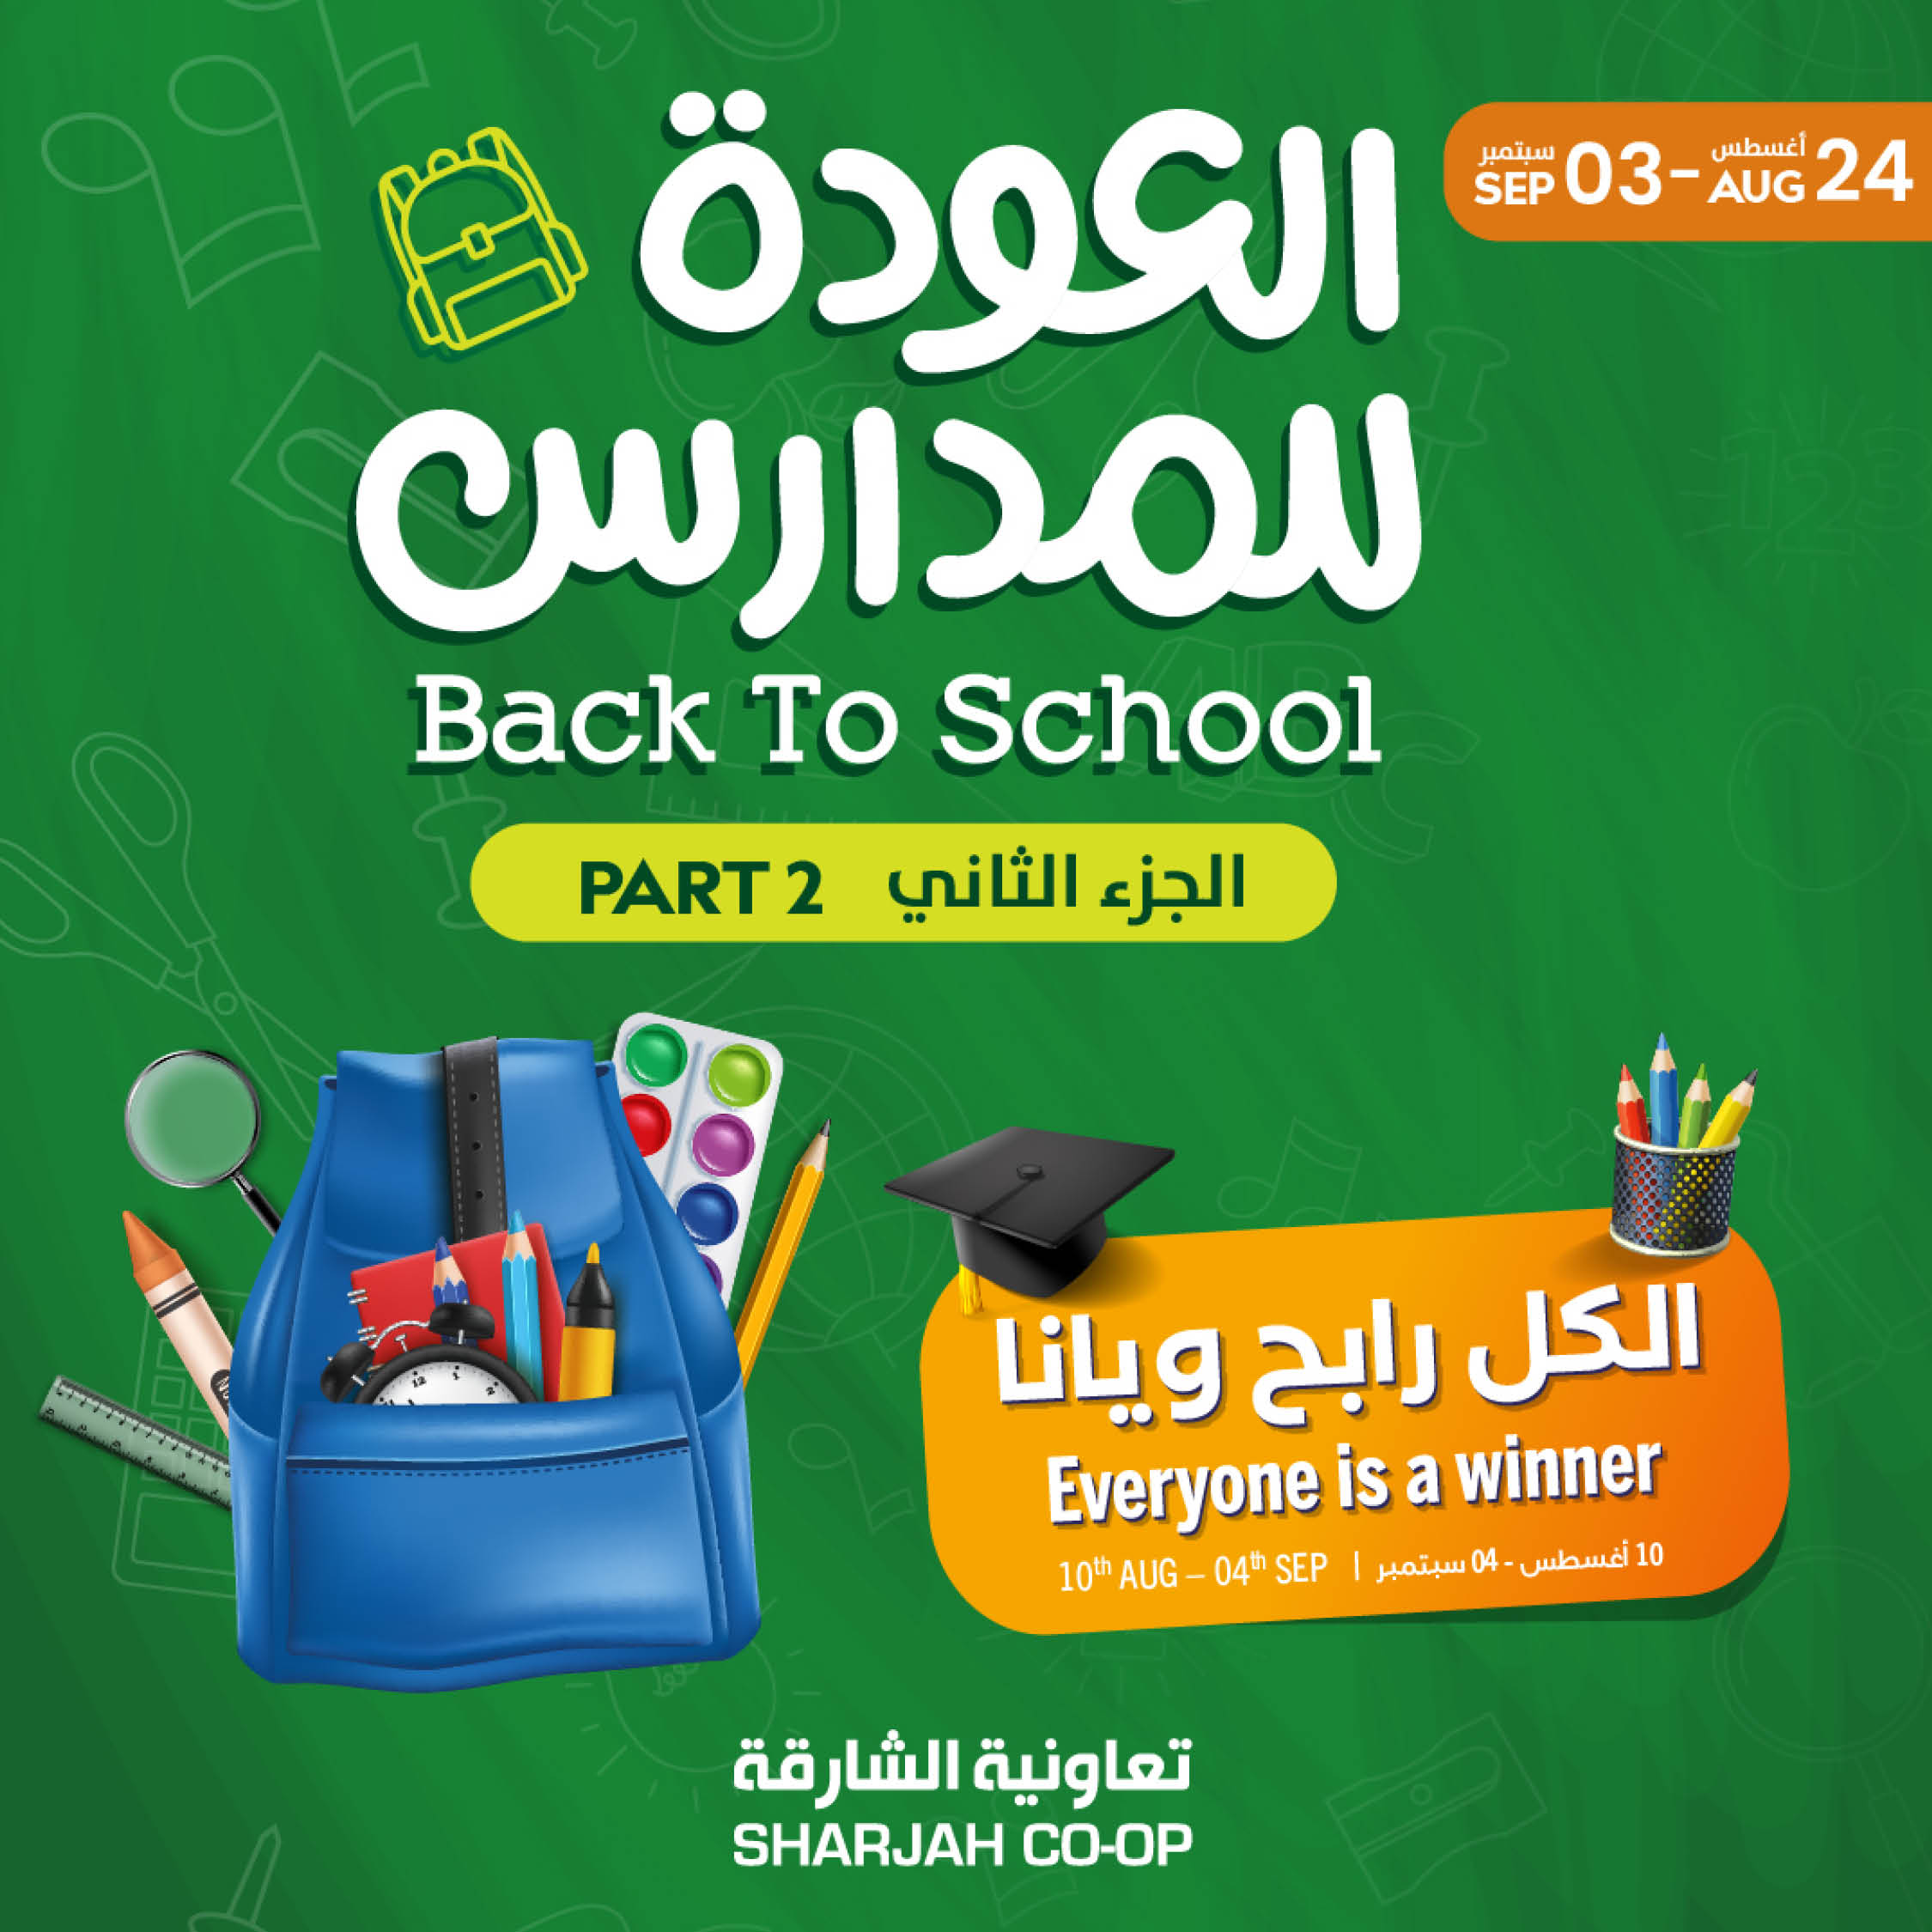 Back to school Offers 2